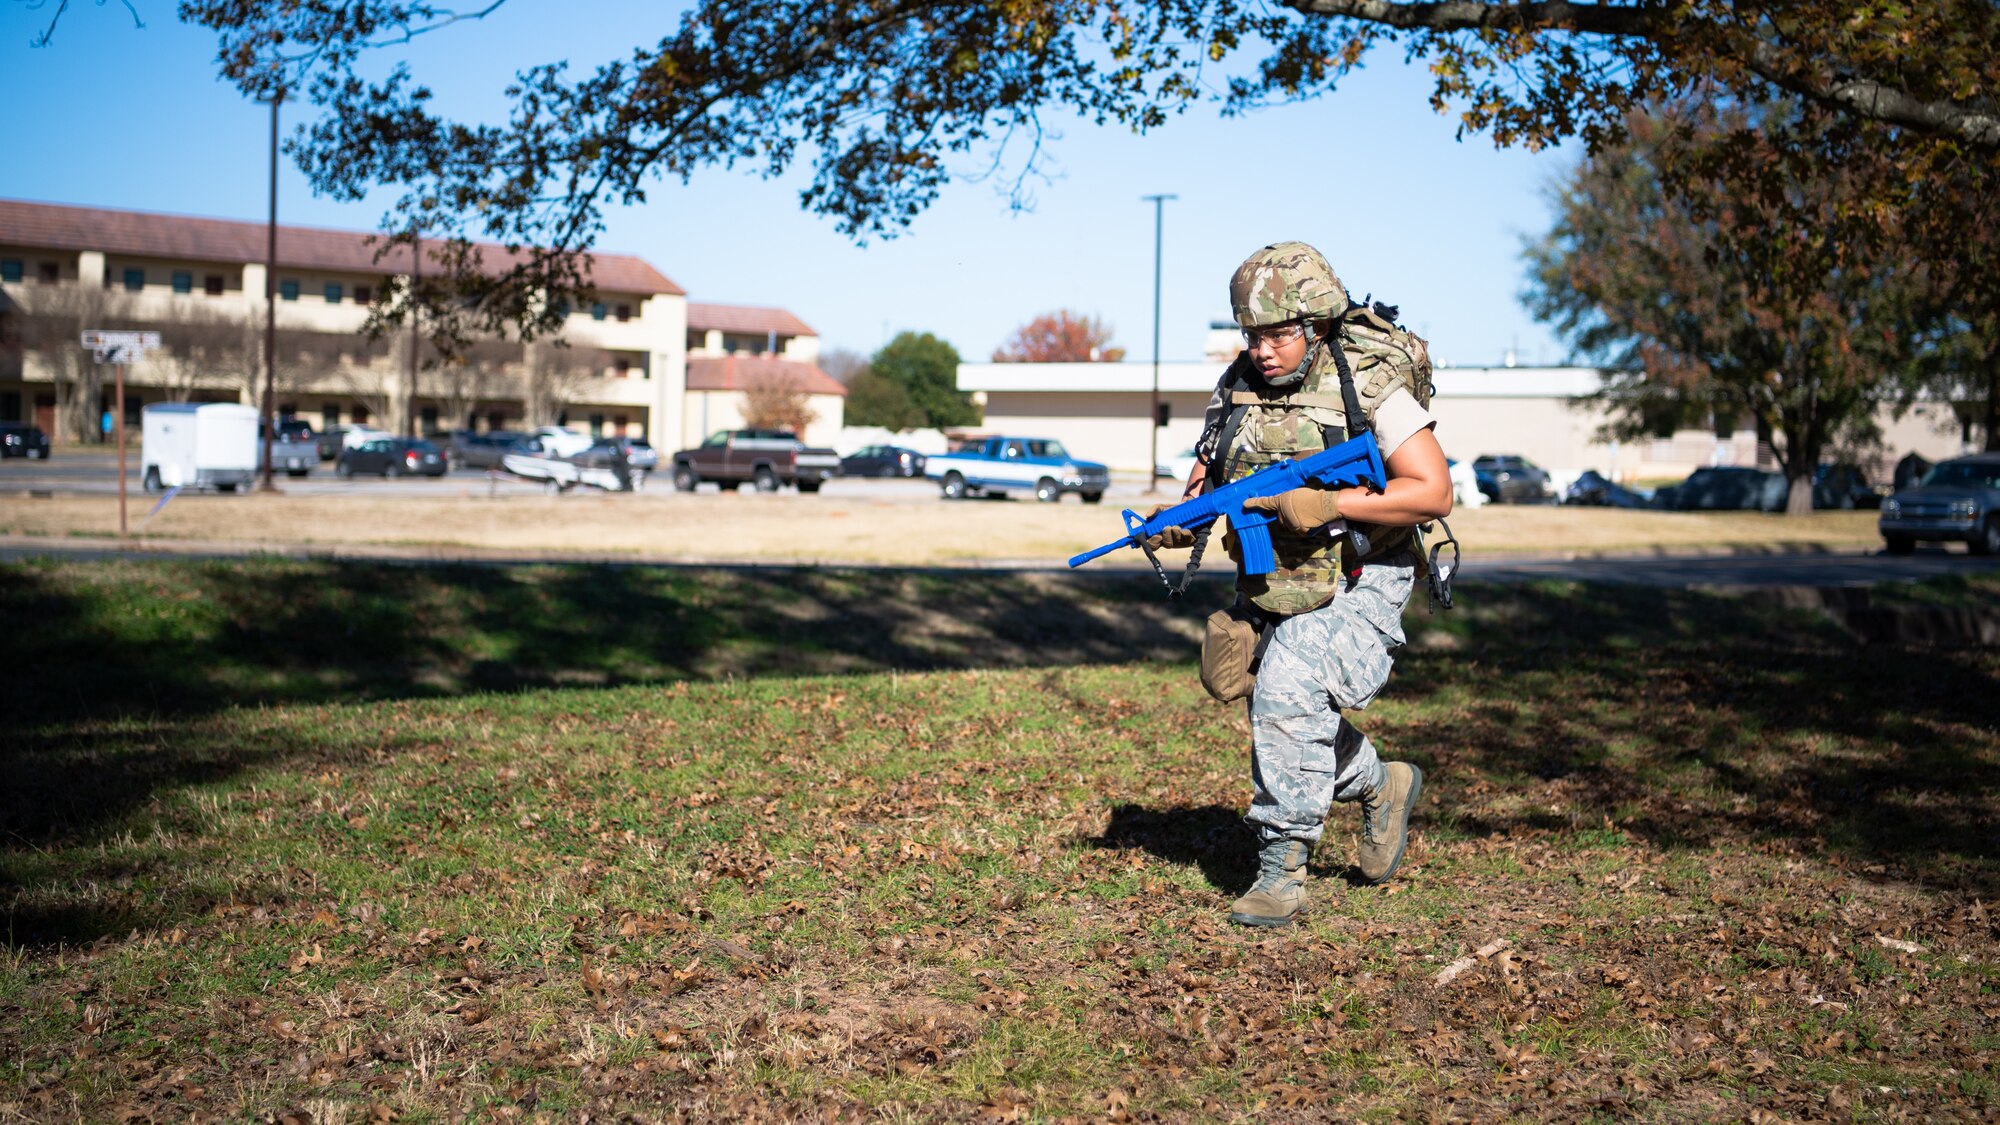 Staff Sgt. Jelisa Adams, 2nd Healthcare Operations Squadron medical technician, runs during a Tactical Combat Casualty Care (TCCC) field training exercise at Barksdale Air Force Base, La., Dec. 9, 2020.